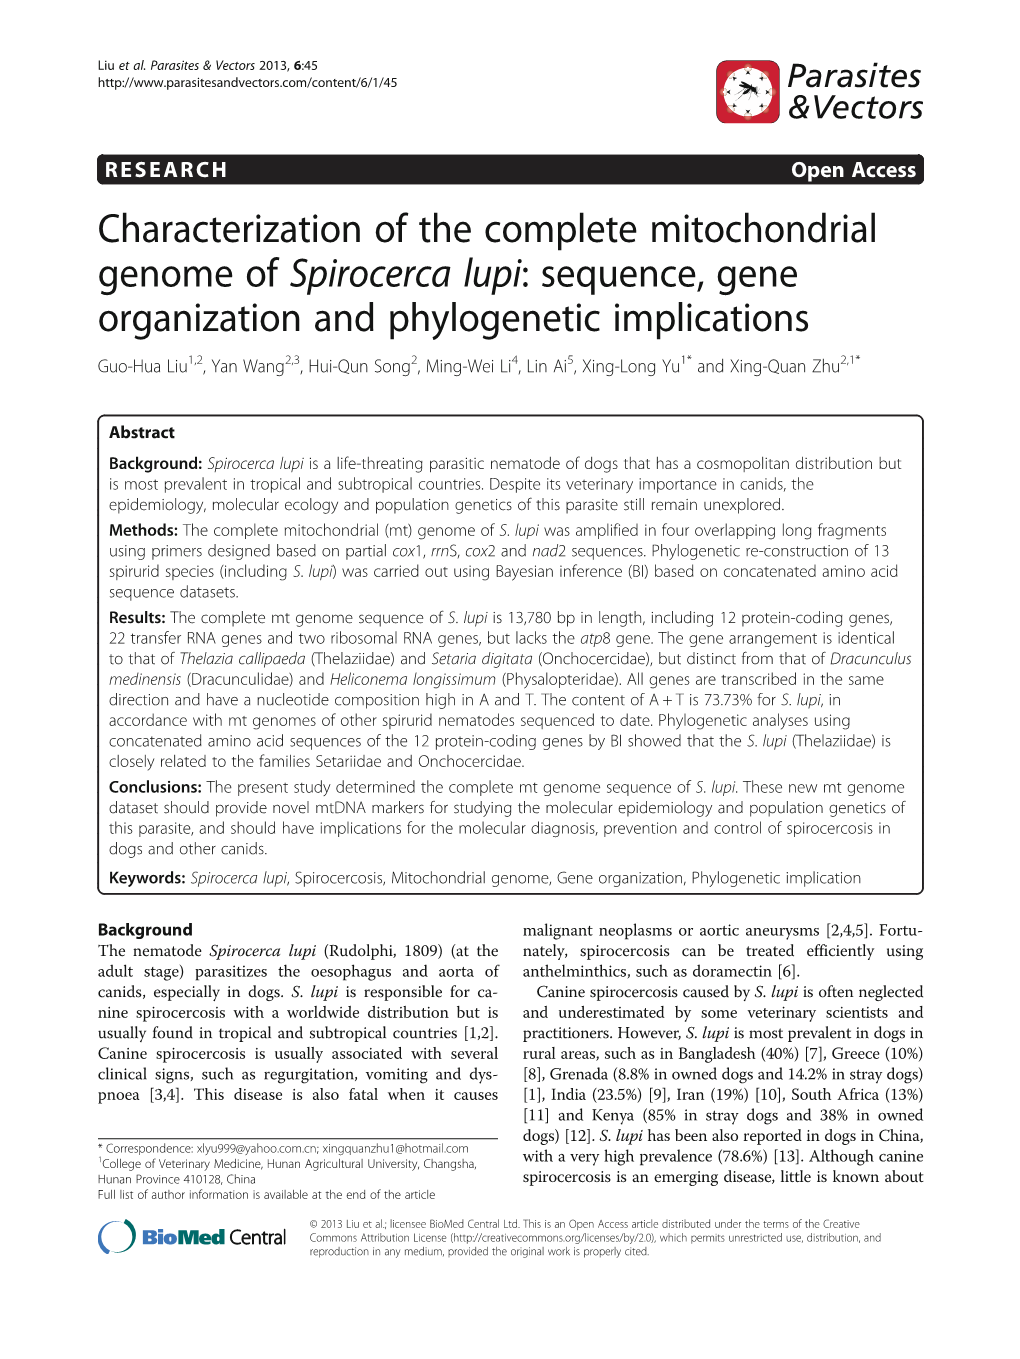 Characterization of the Complete Mitochondrial Genome Of